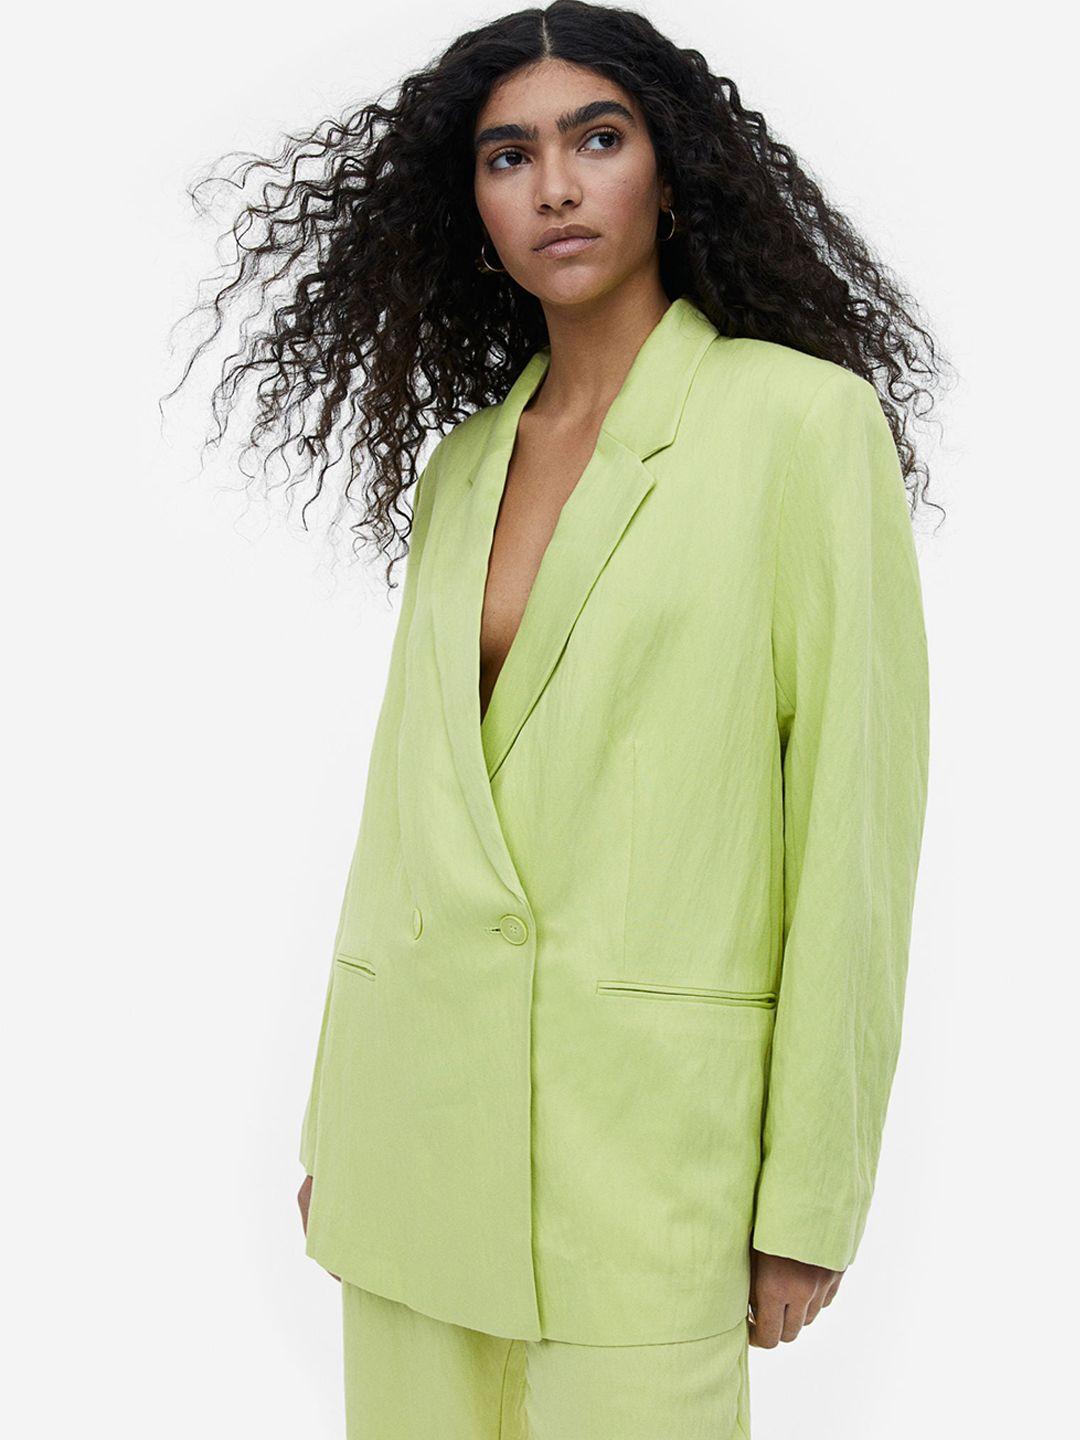 h&m women double-breasted blazer